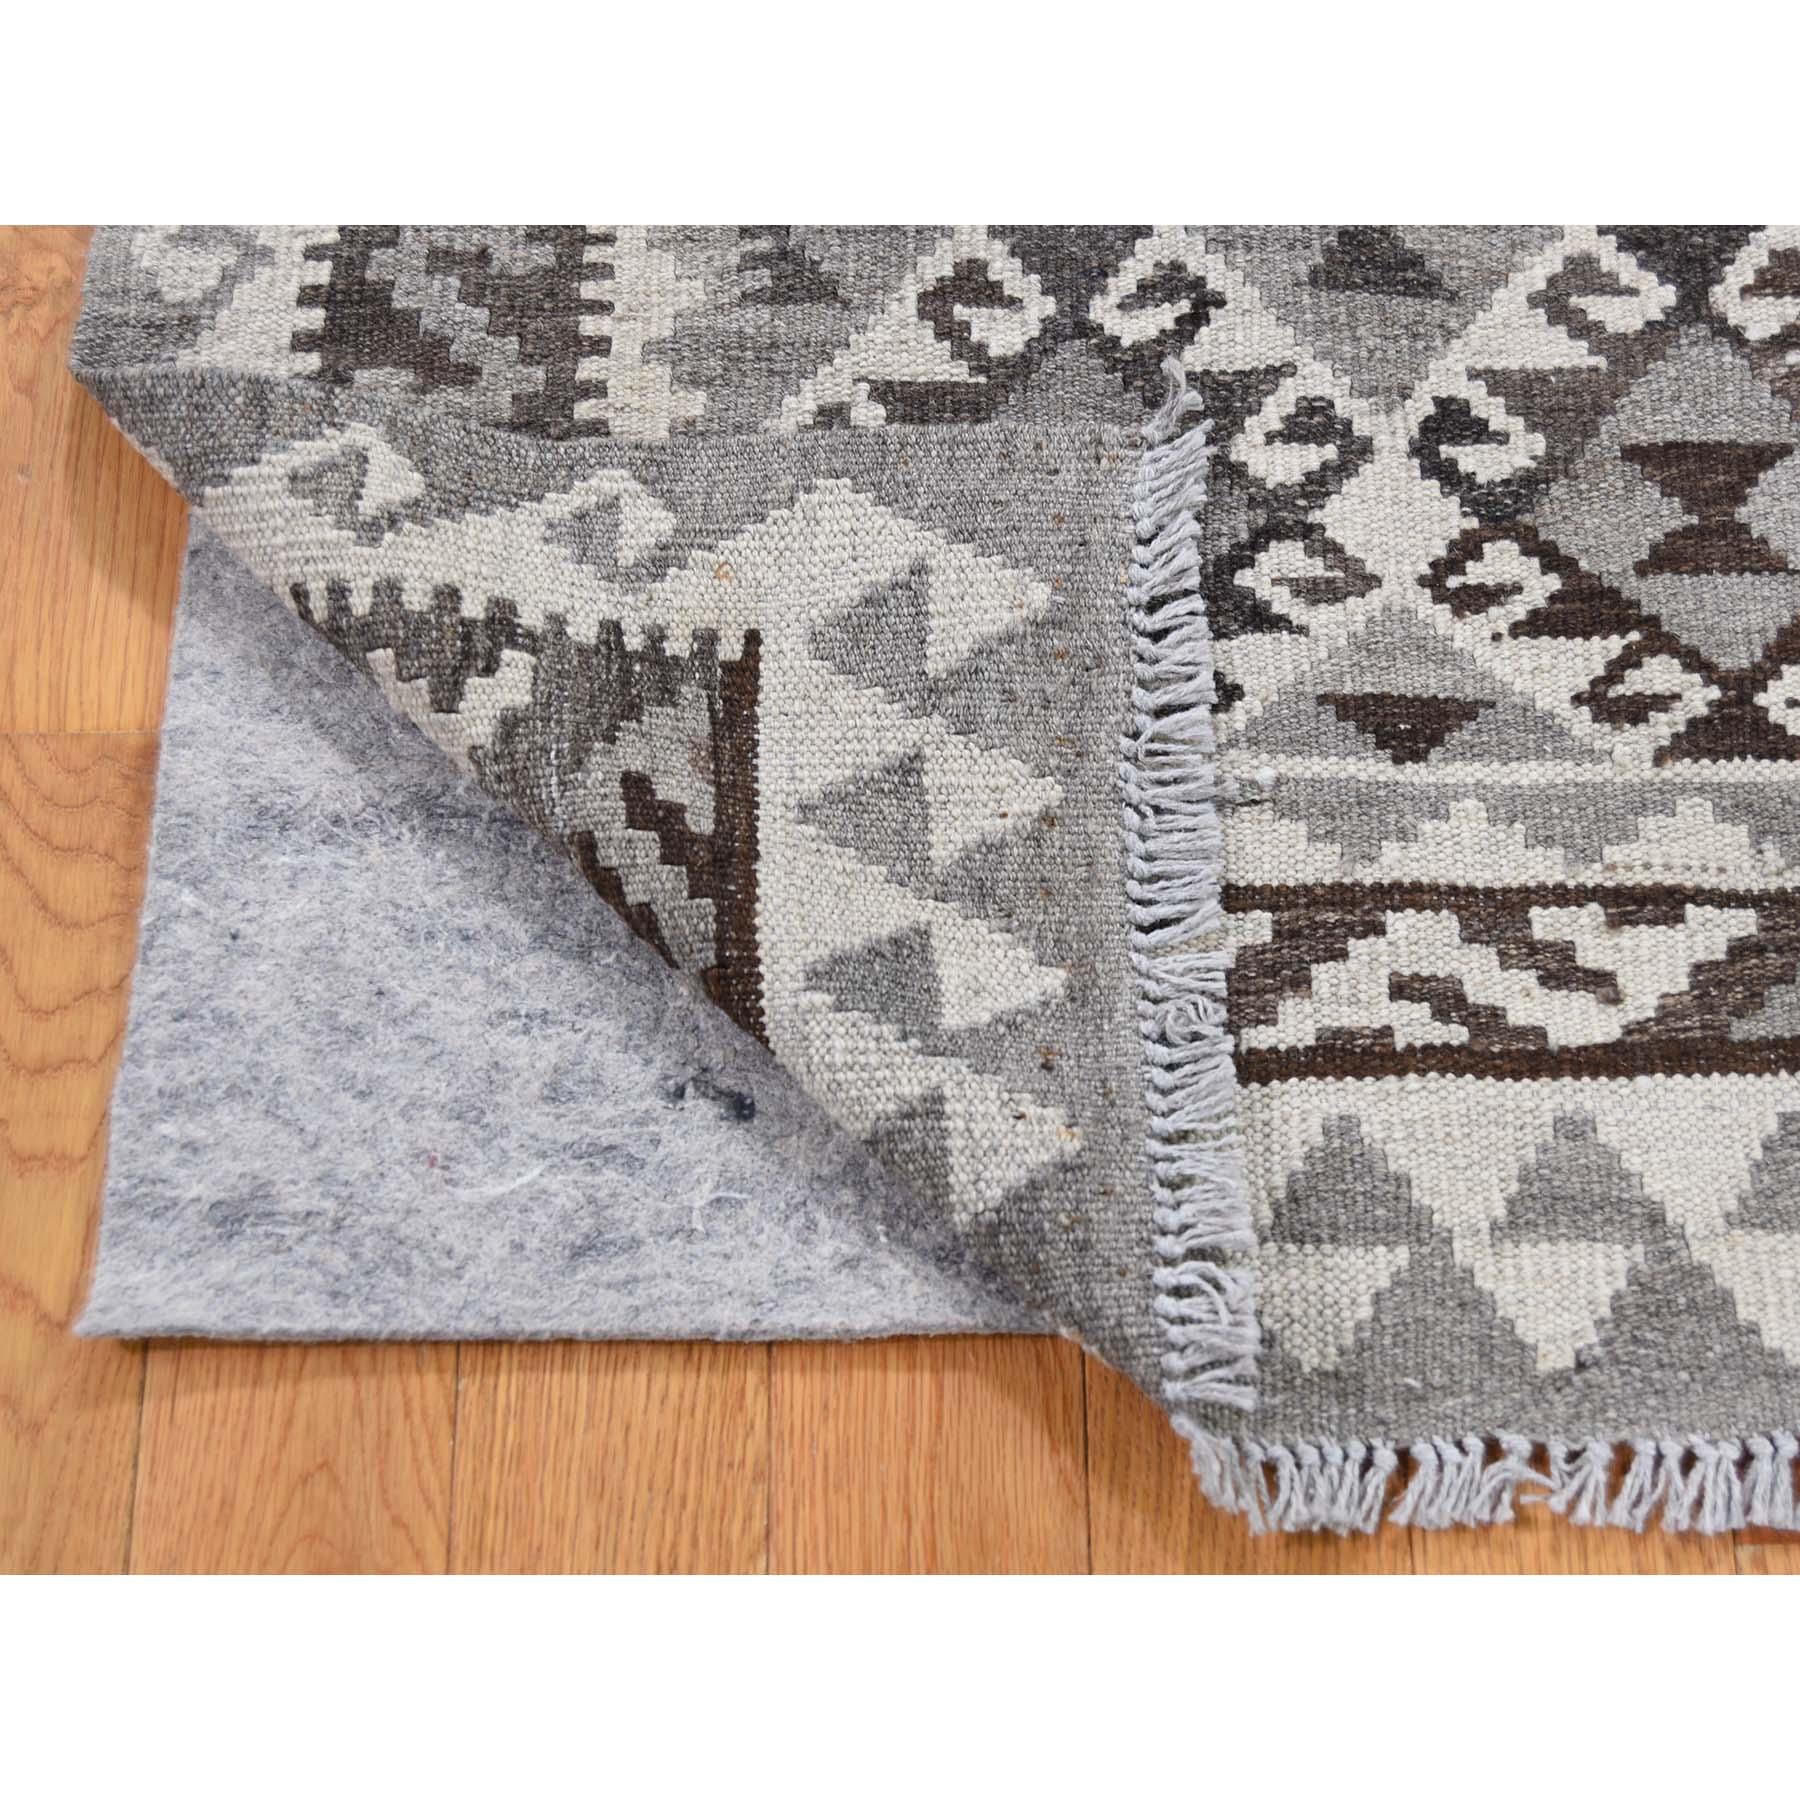 3-4 x5-2  Undyed Natural Wool Afghan Kilim Reversible Hand Woven Oriental Rug 